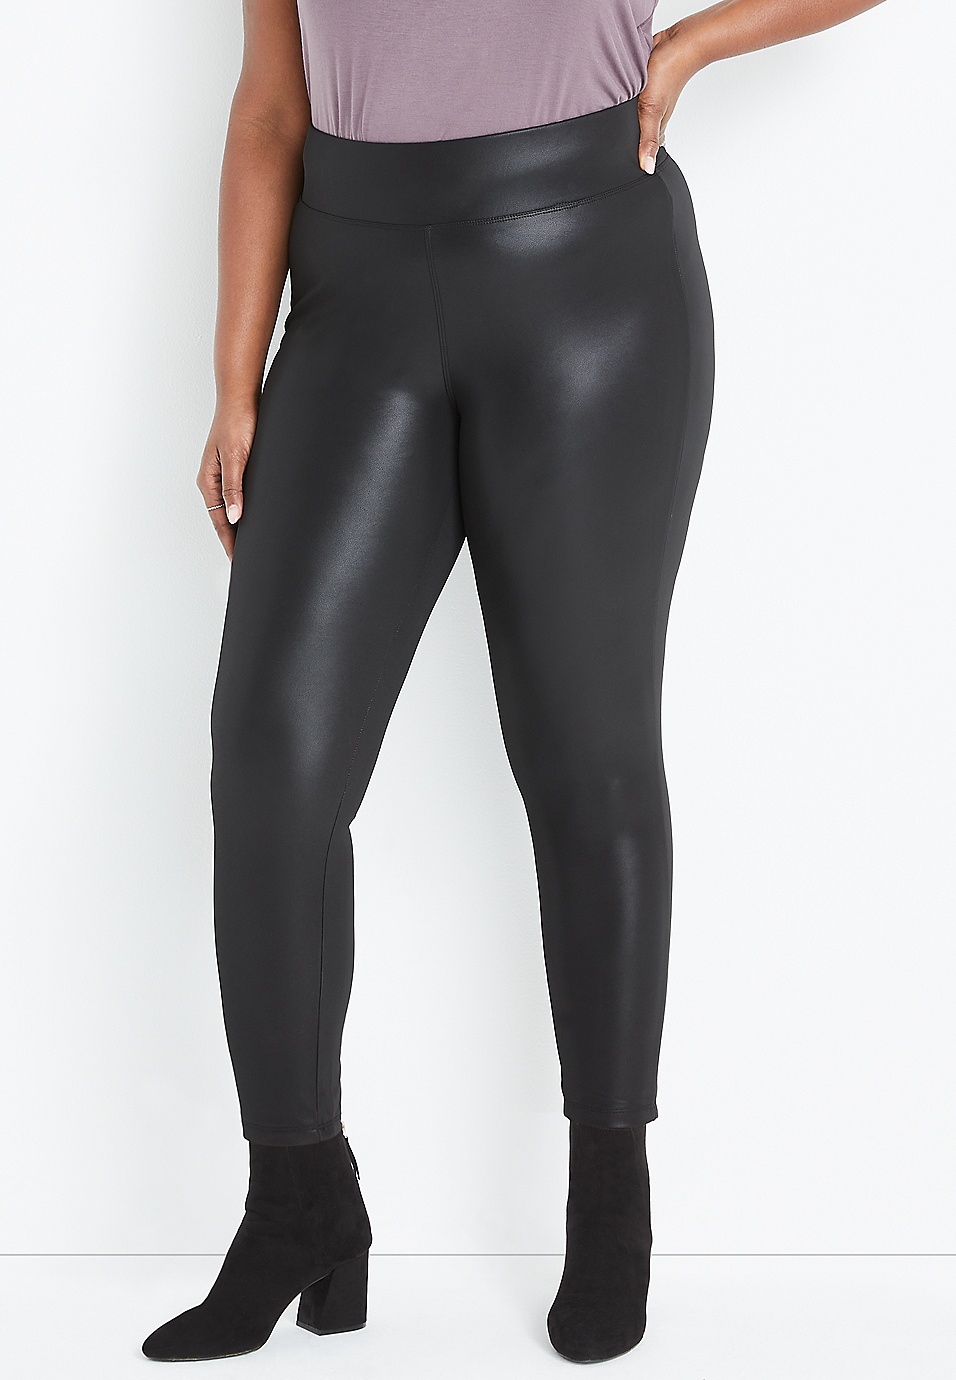 Plus Size ONE5ONE™ Black Faux Leather 4-Way Stretch Legging